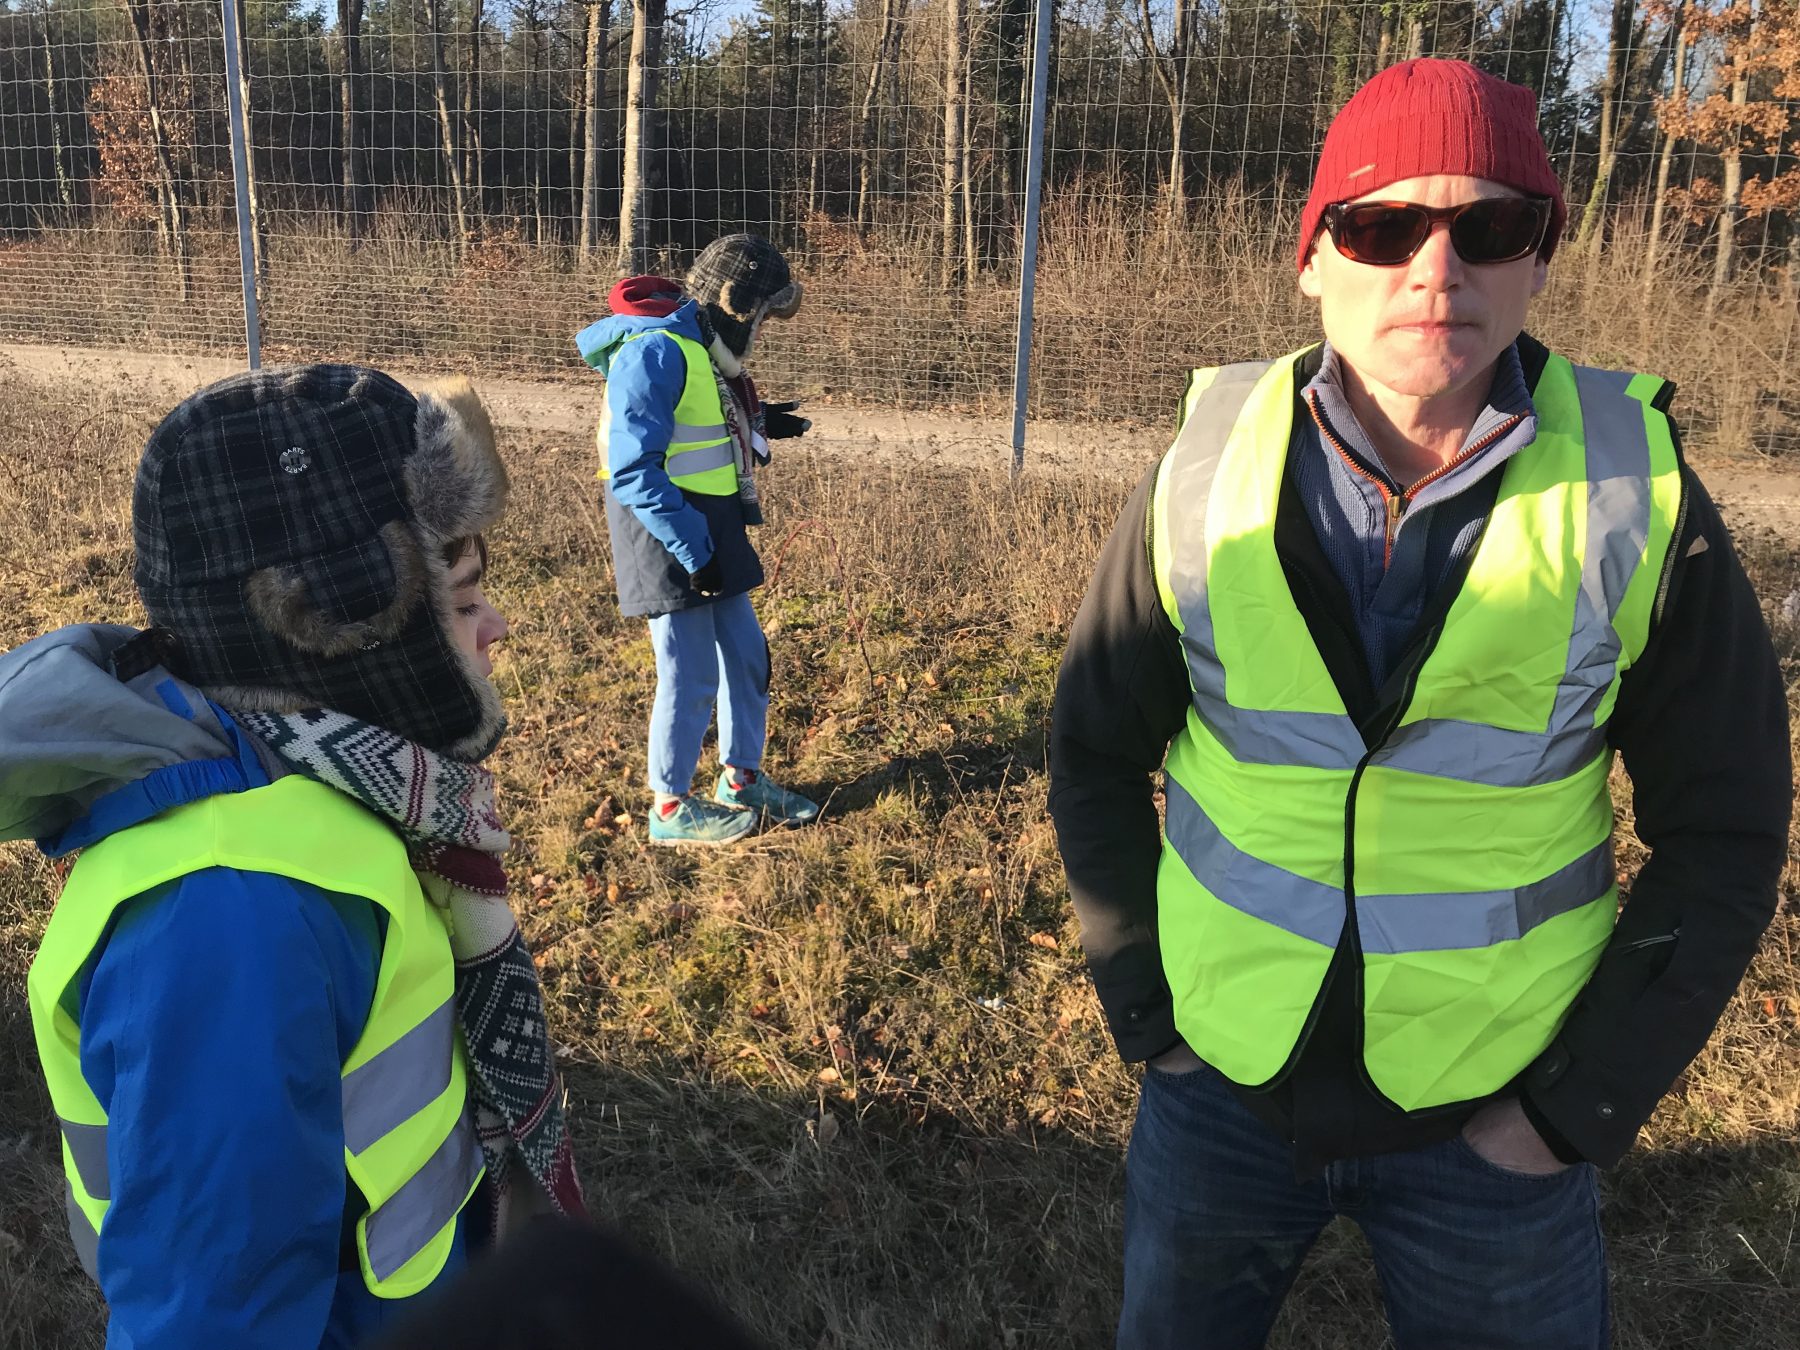 The 'gillets jaunes' by the side of the autoroute. The Half Term Family Ski Holiday that did not result as planned.